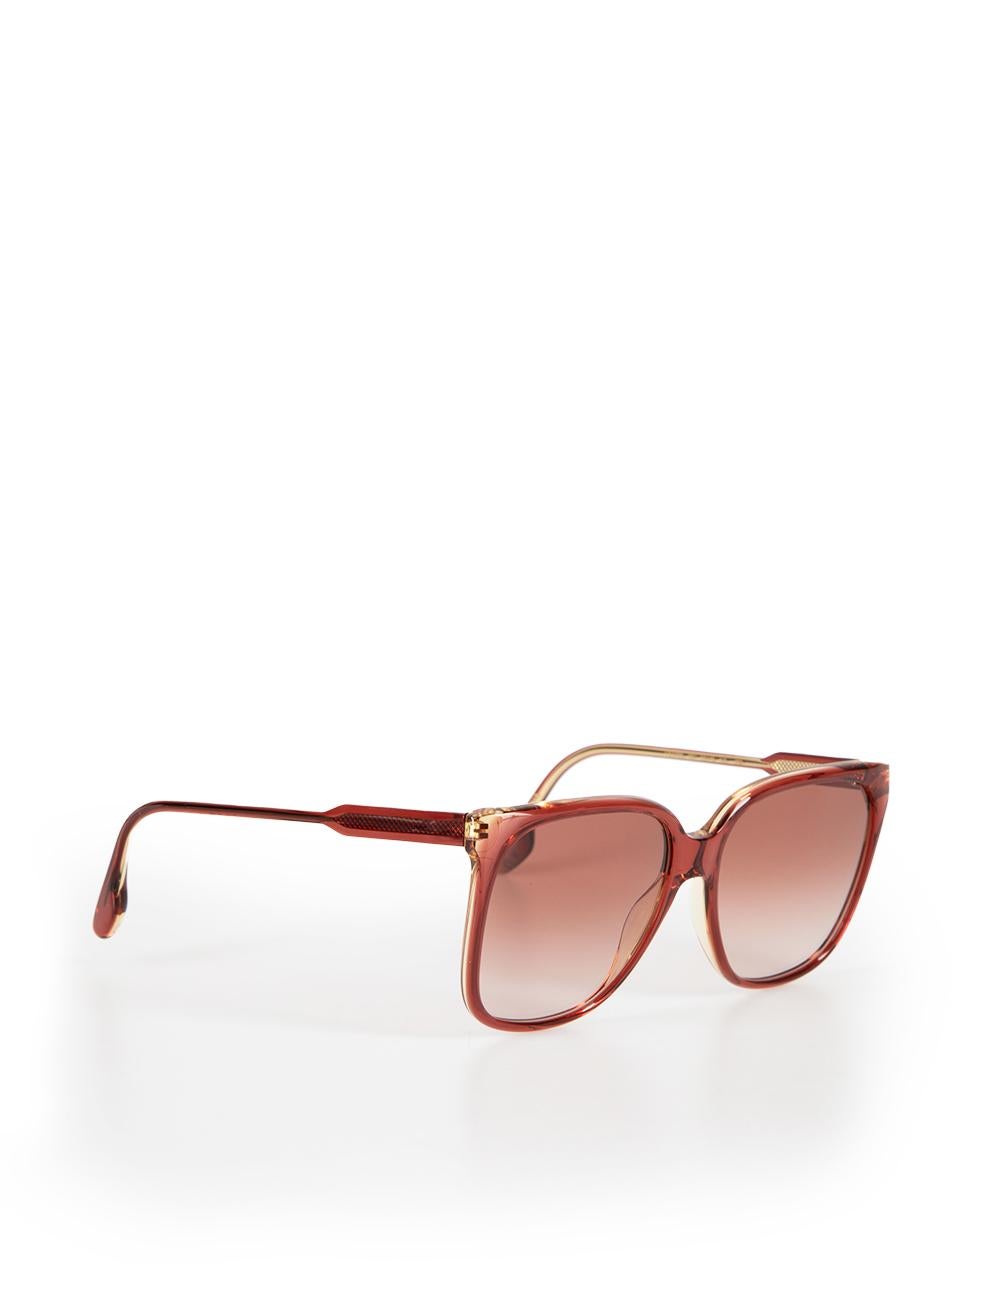 Victoria Beckham Wine / Honey Square Sunglasses In New Condition For Sale In London, GB